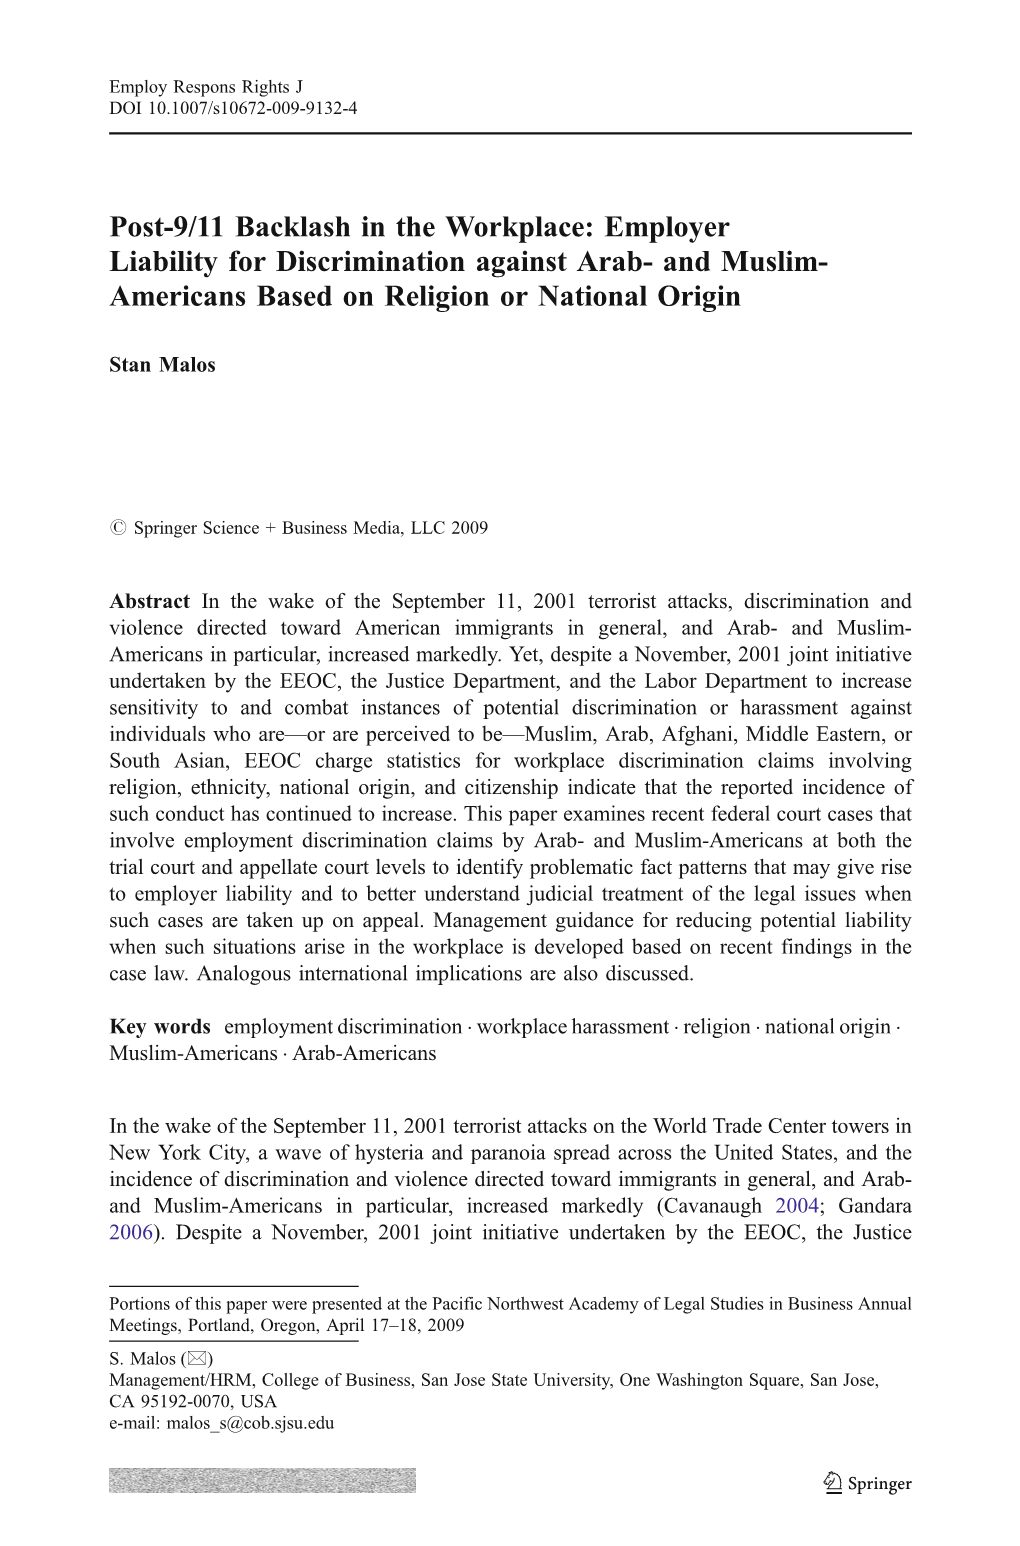 Post-9/11 Backlash in the Workplace: Employer Liability for Discrimination Against Arab- and Muslim- Americans Based on Religion Or National Origin